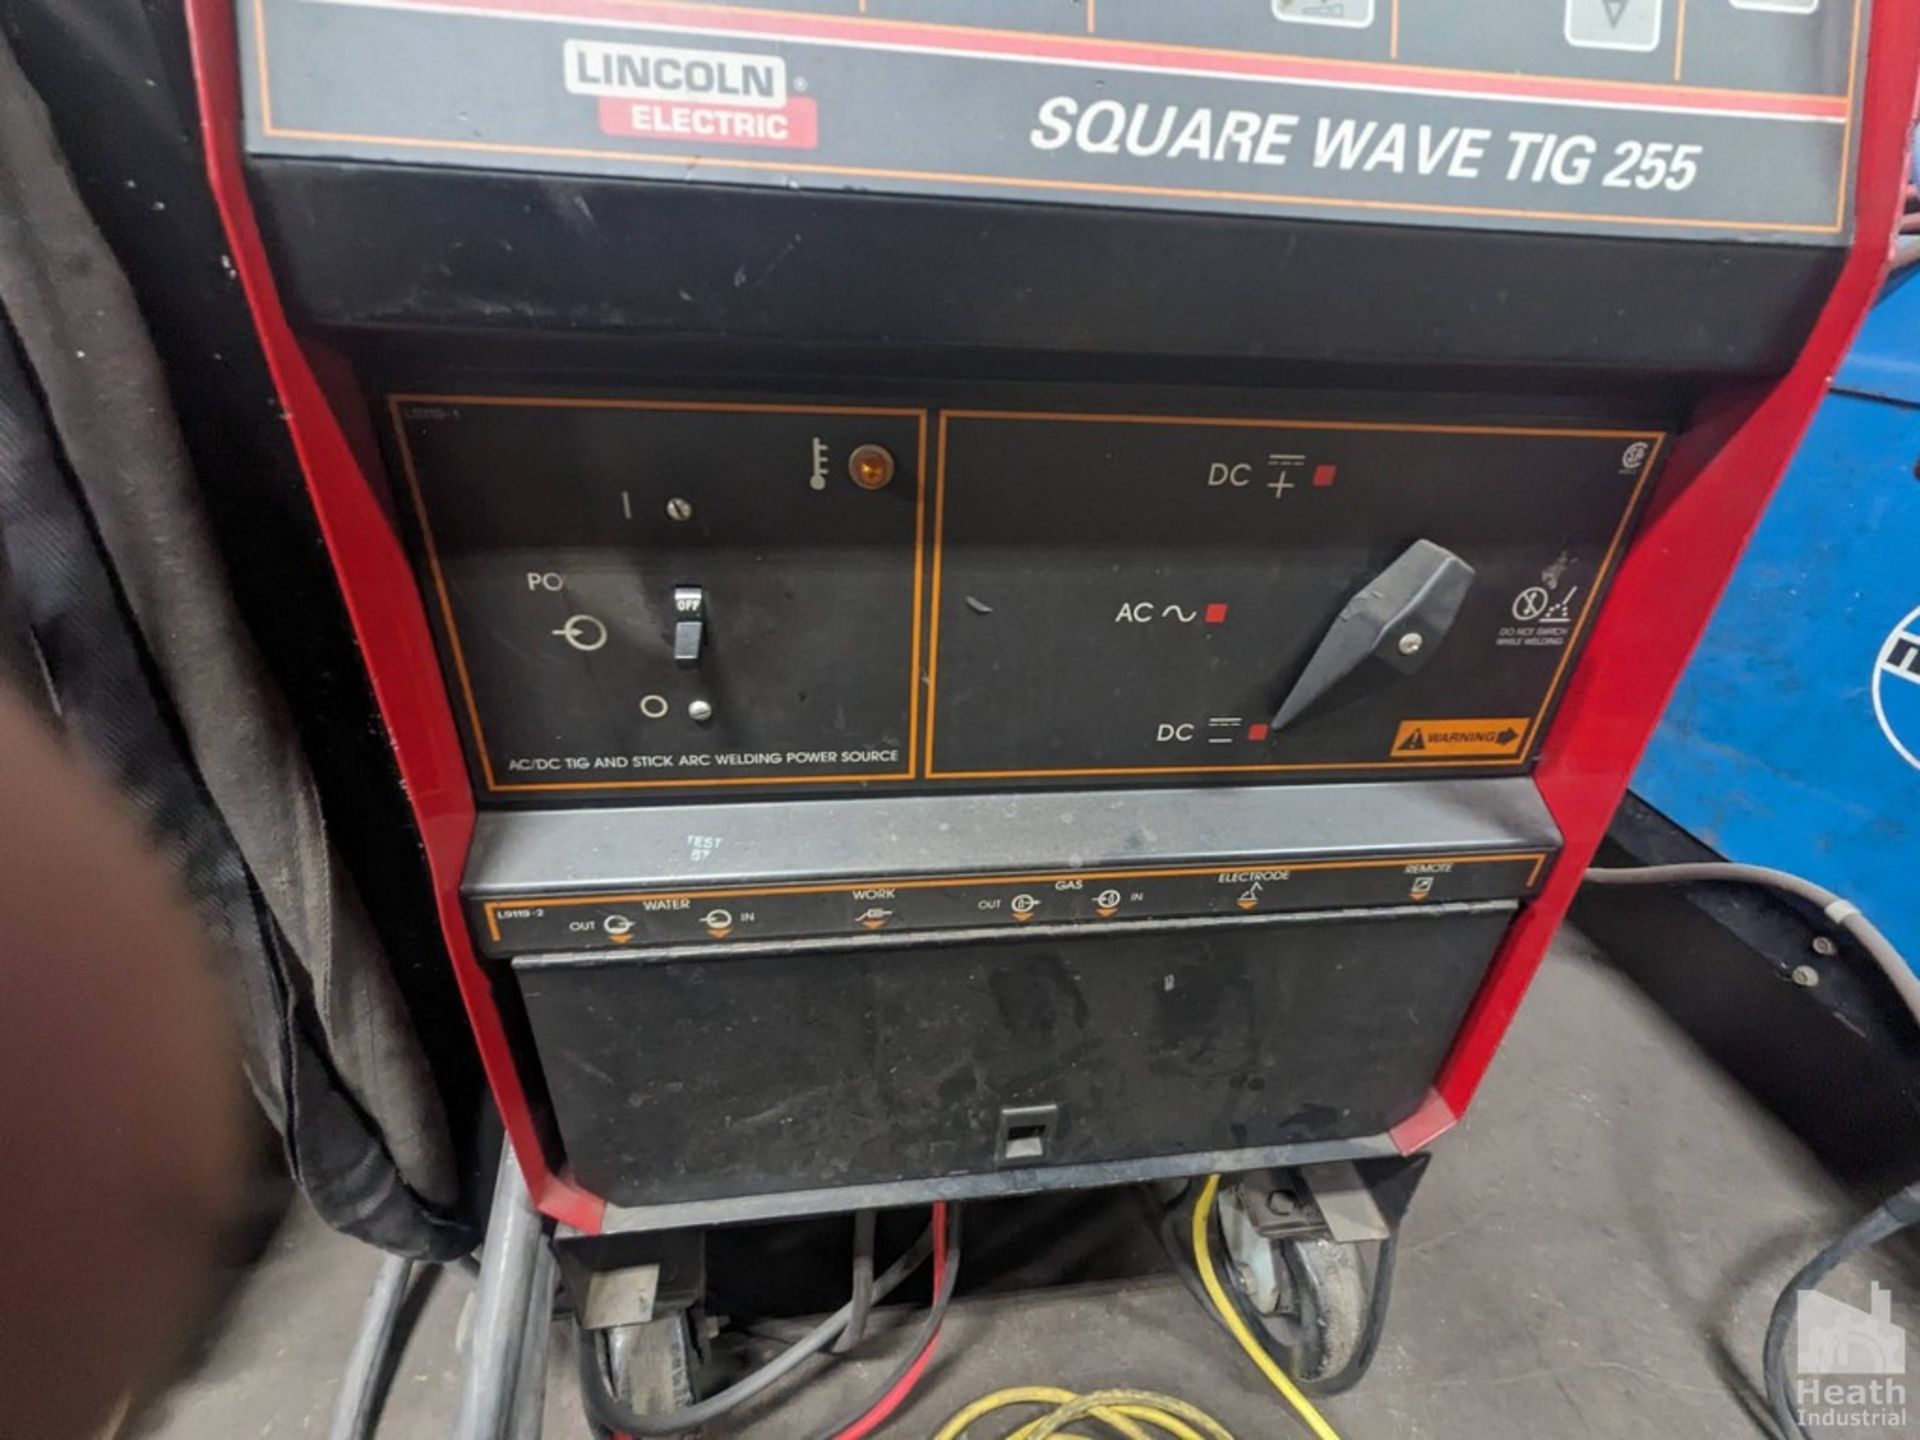 LINCOLN ELECTRIC SQUARE WAVE TIG 255 WELDER 10022-U1960105125 WITH TWECO TC900 WATER COOLER, FOOT - Image 4 of 6